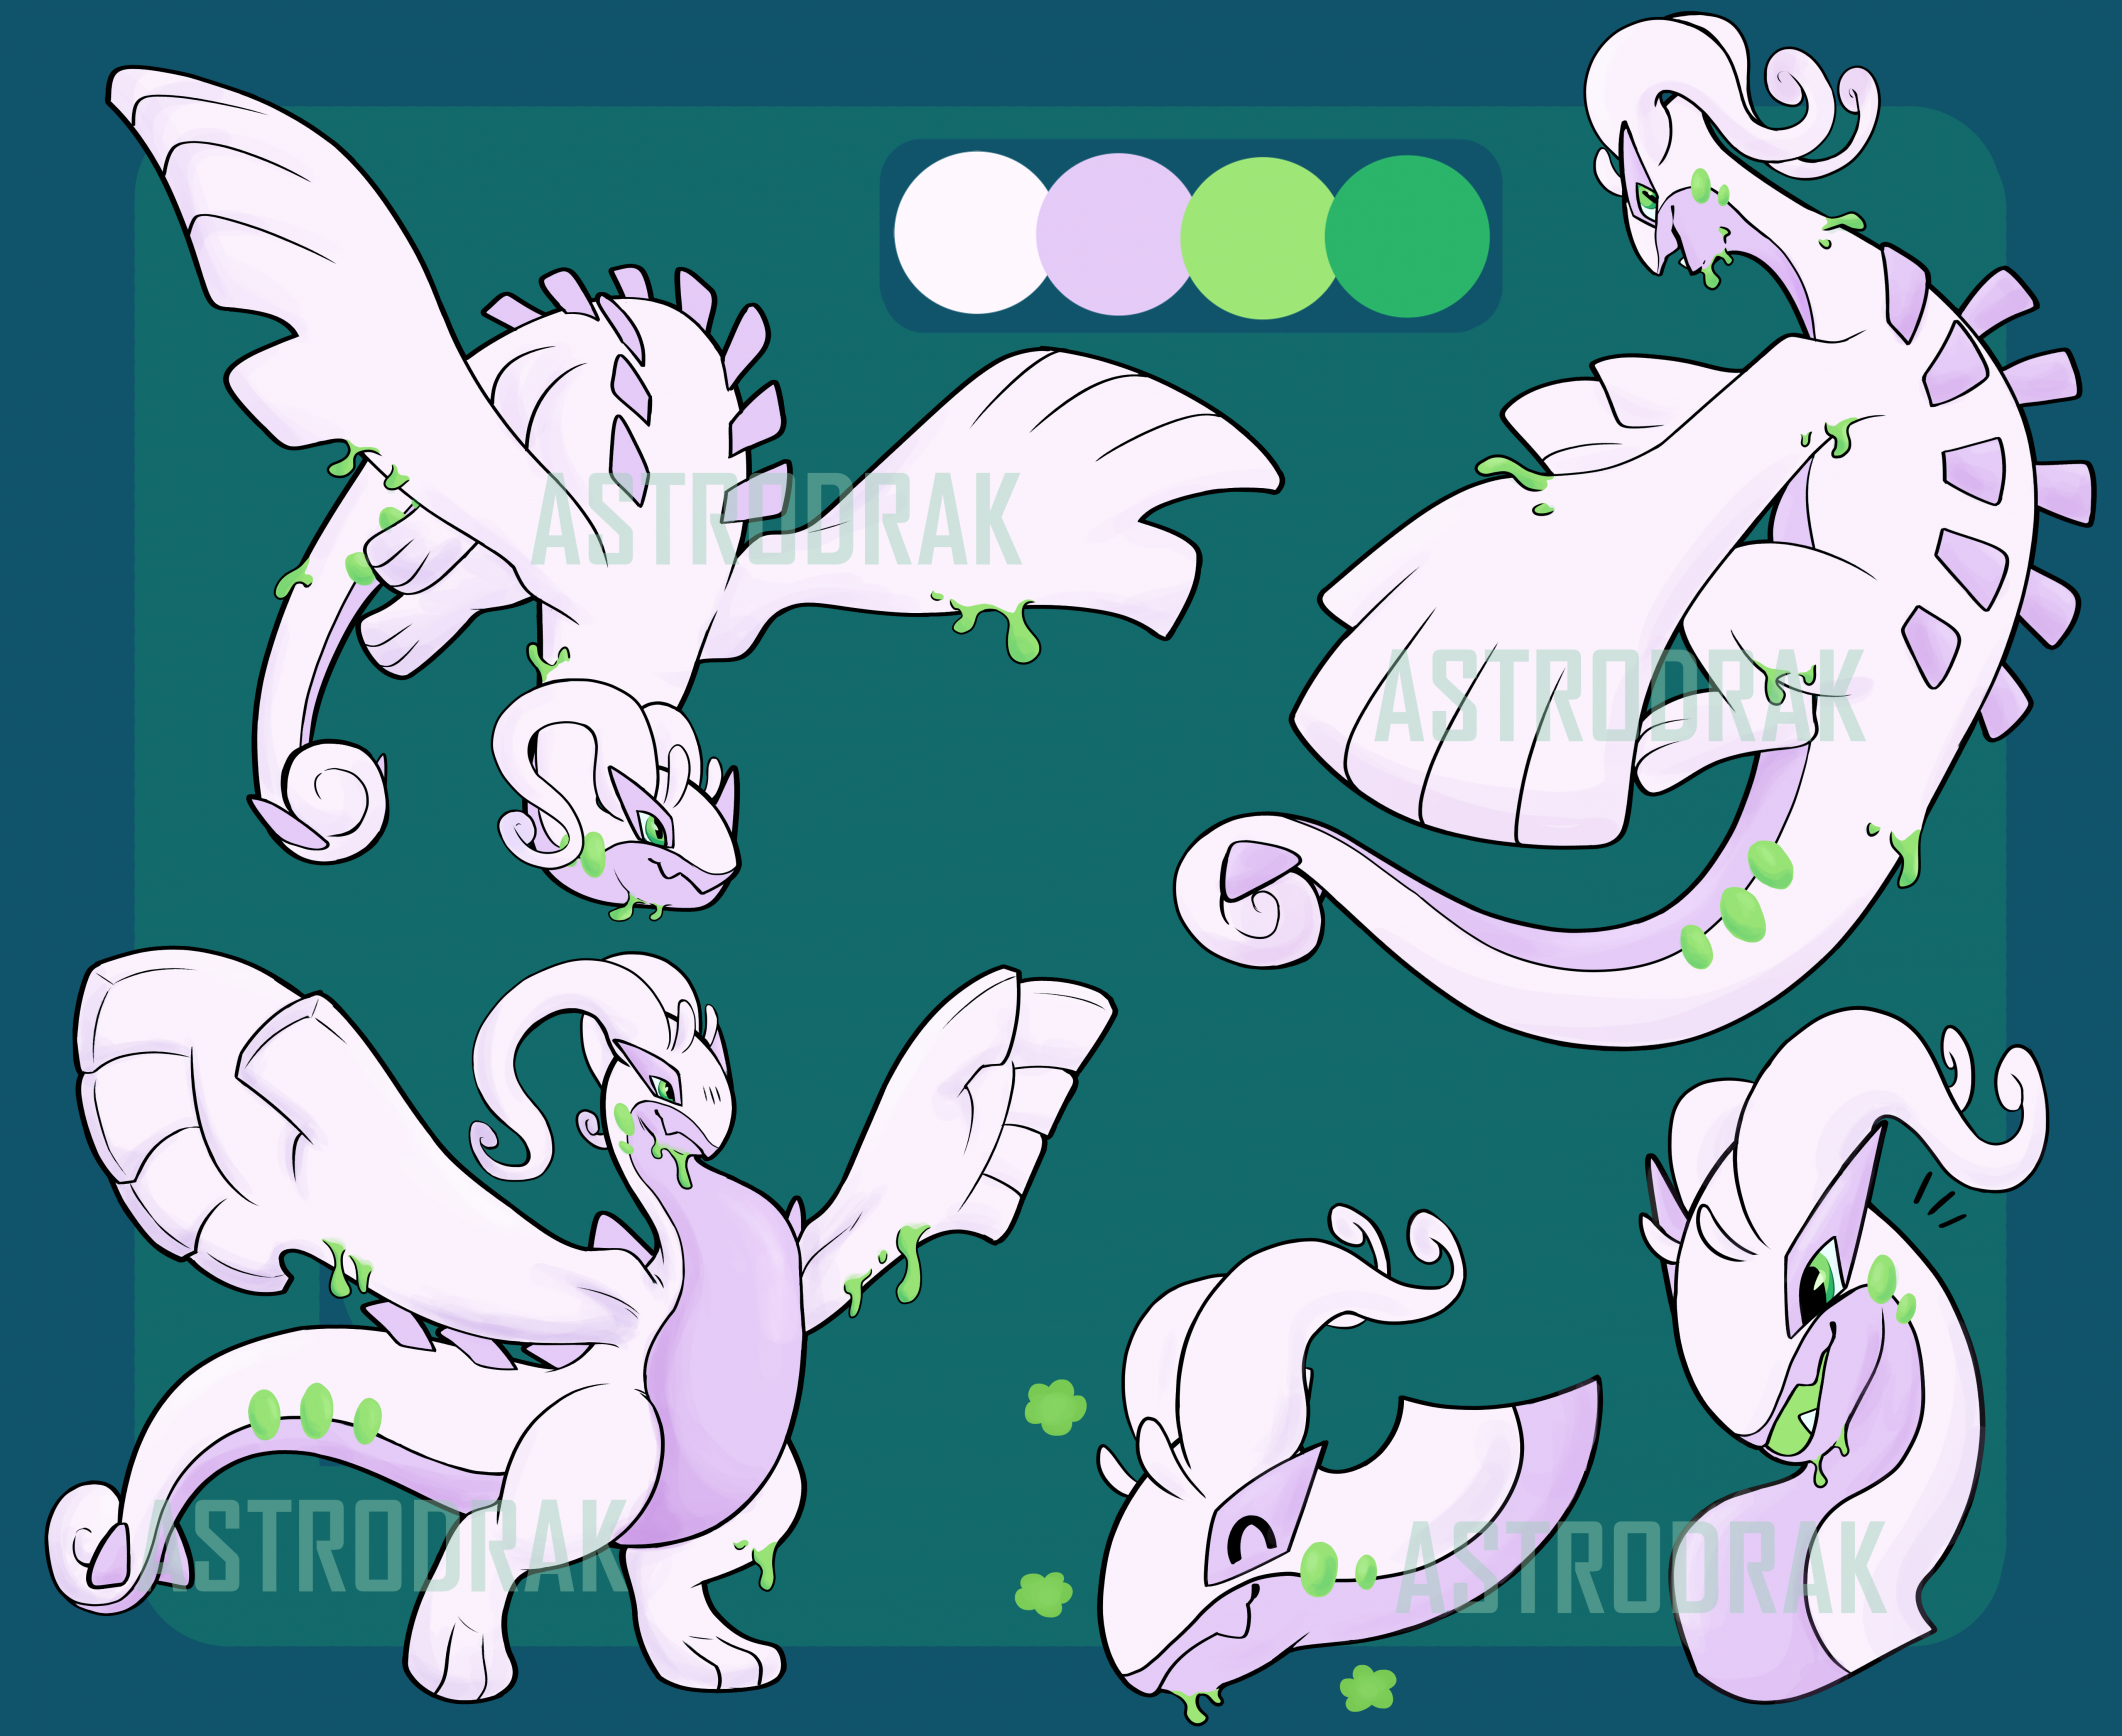 $20.00 Lugia/Zekrom Fusion Adopt (Sold) by min19 -- Fur Affinity [dot] net